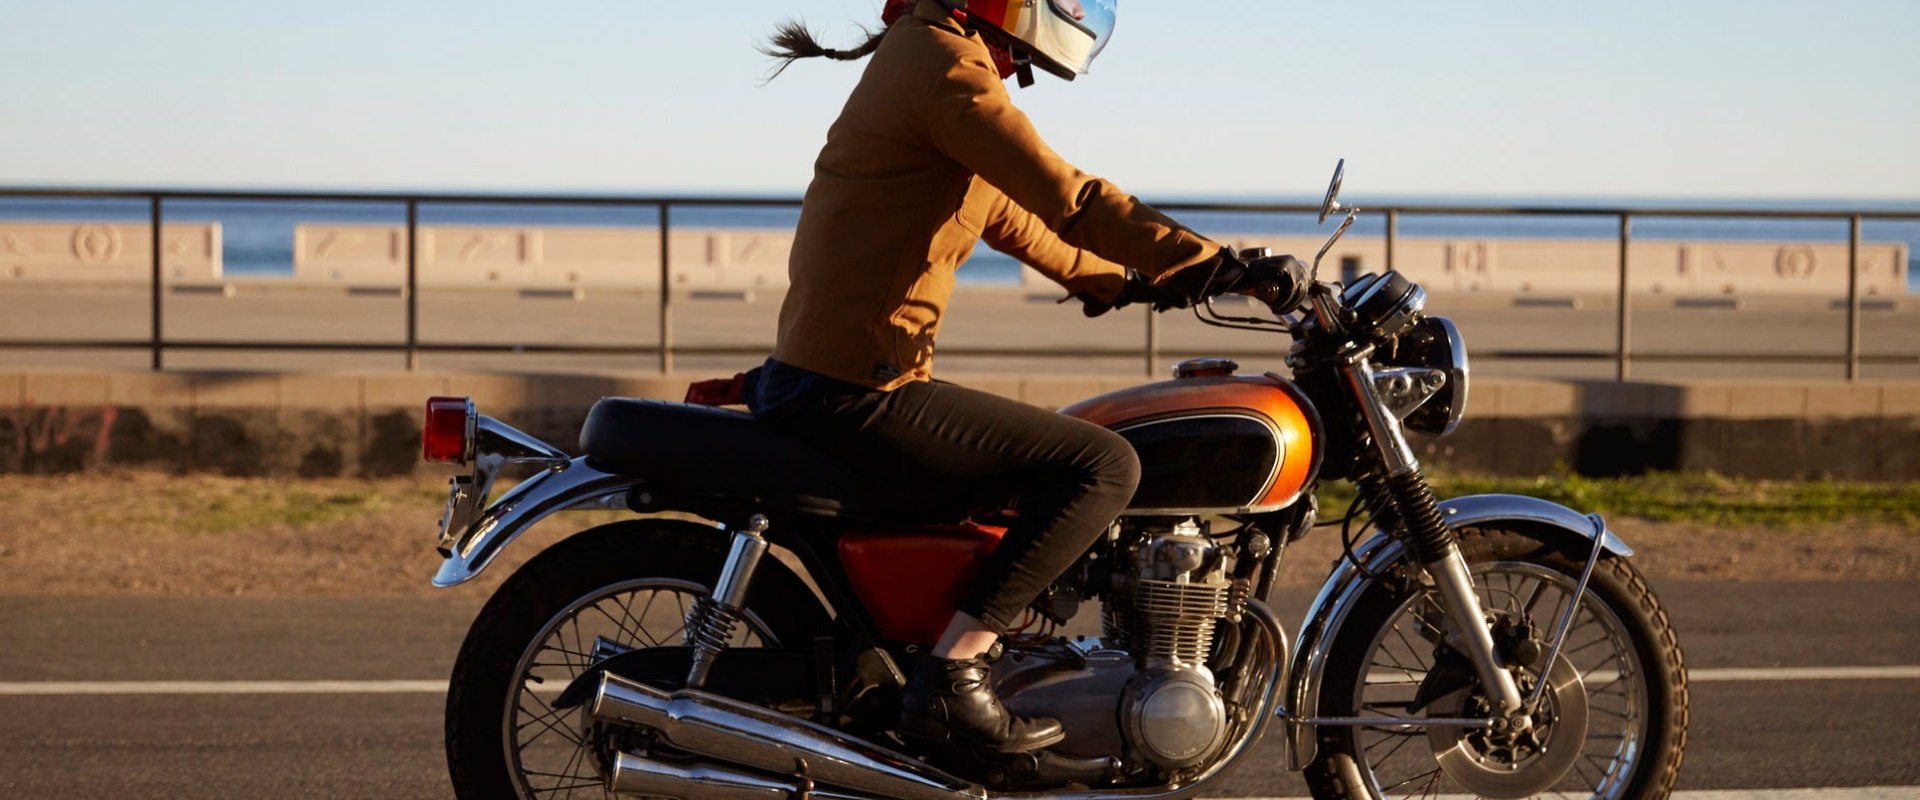 Does Motorcycle Insurance Cover Me When I'm Riding a Borrowed Bike?